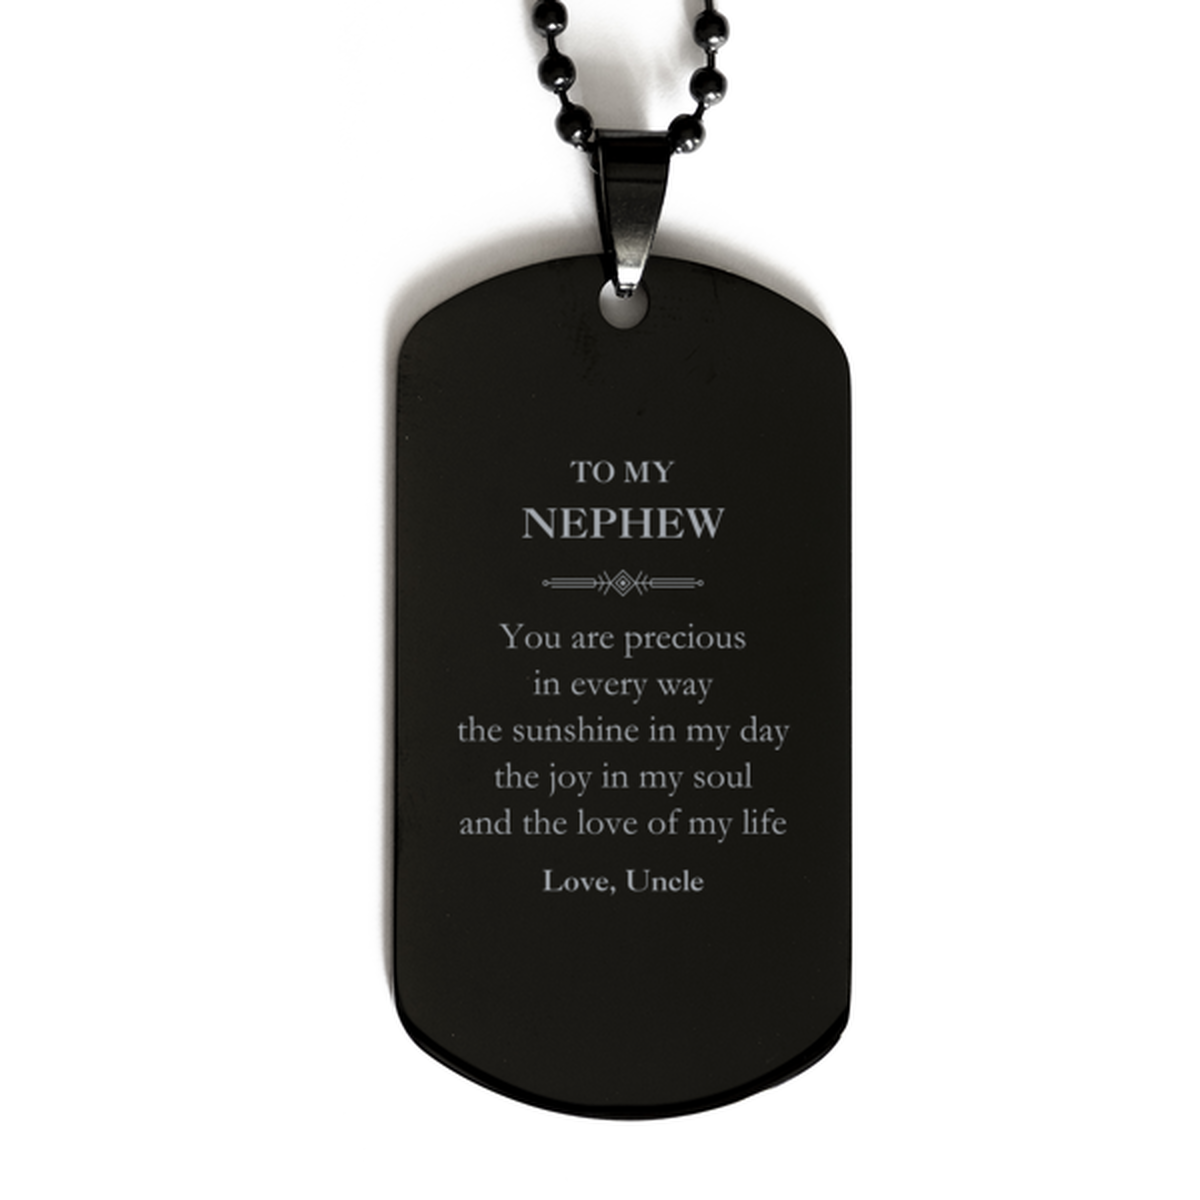 Graduation Gifts for Nephew Black Dog Tag Present from Uncle, Christmas Nephew Birthday Gifts Nephew You are precious in every way the sunshine in my day. Love, Uncle